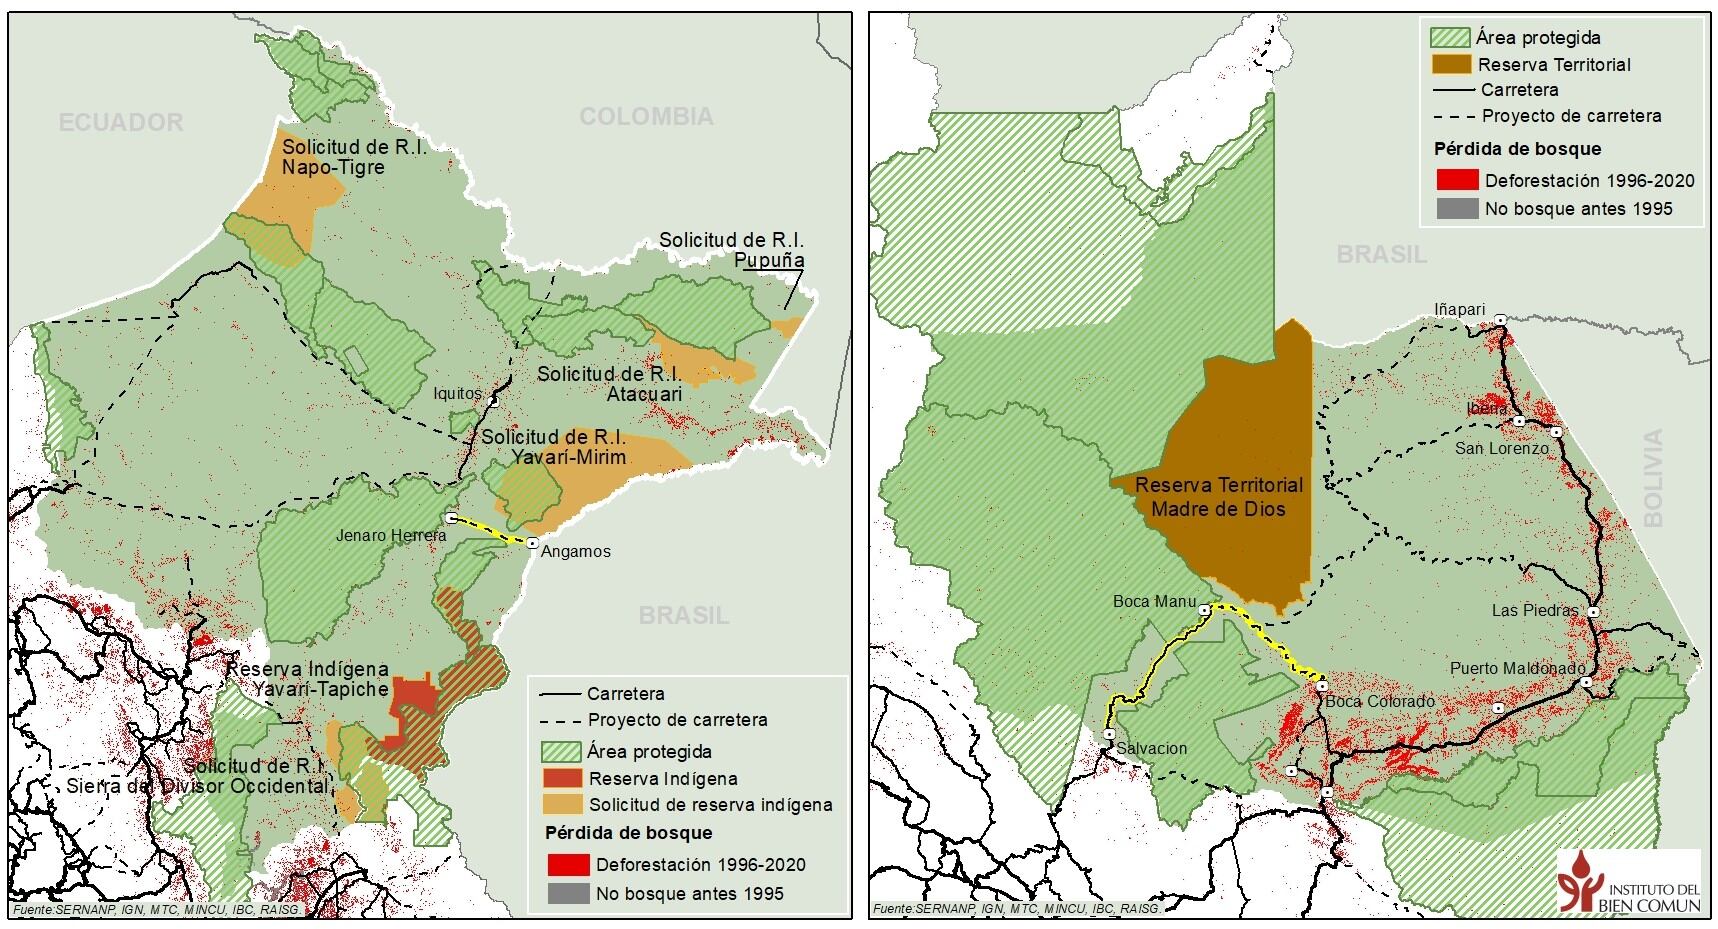 Figure 1. In the Peruvian region of Loreto, a road project between Genaro Herrera and the border colony of Angamos threatening the Yavarí-Mirim reserve for isolated indigenous groups is already well advanced. The resistance of the Matsé to this same type of road resulted in air force bombing raids in the 1960s.Figure 2: In the Madre de Dios region, a road opened during the Covid-19 pandemic passes within half an hour’s walk of one of the guard posts that protect isolated indigenous people. Around this road, human and drug trafficking is proliferating.